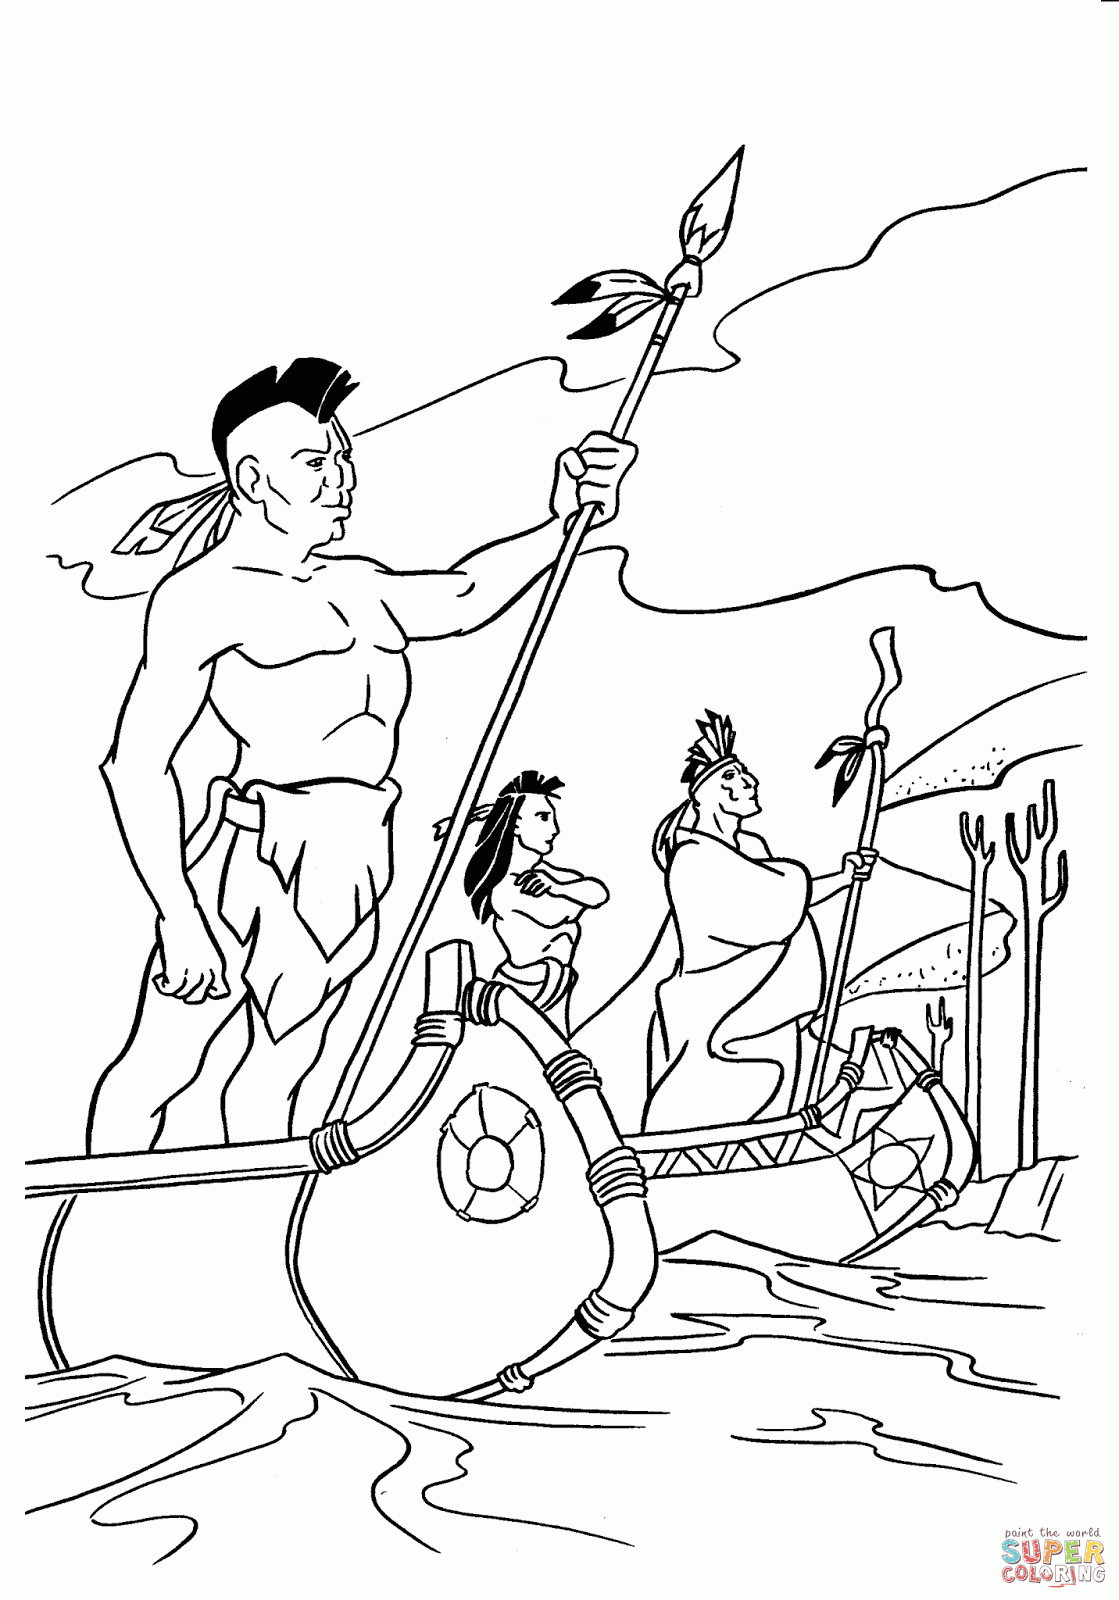 native american printable coloring pages native american coloring pages to download and print for free native pages american coloring printable 